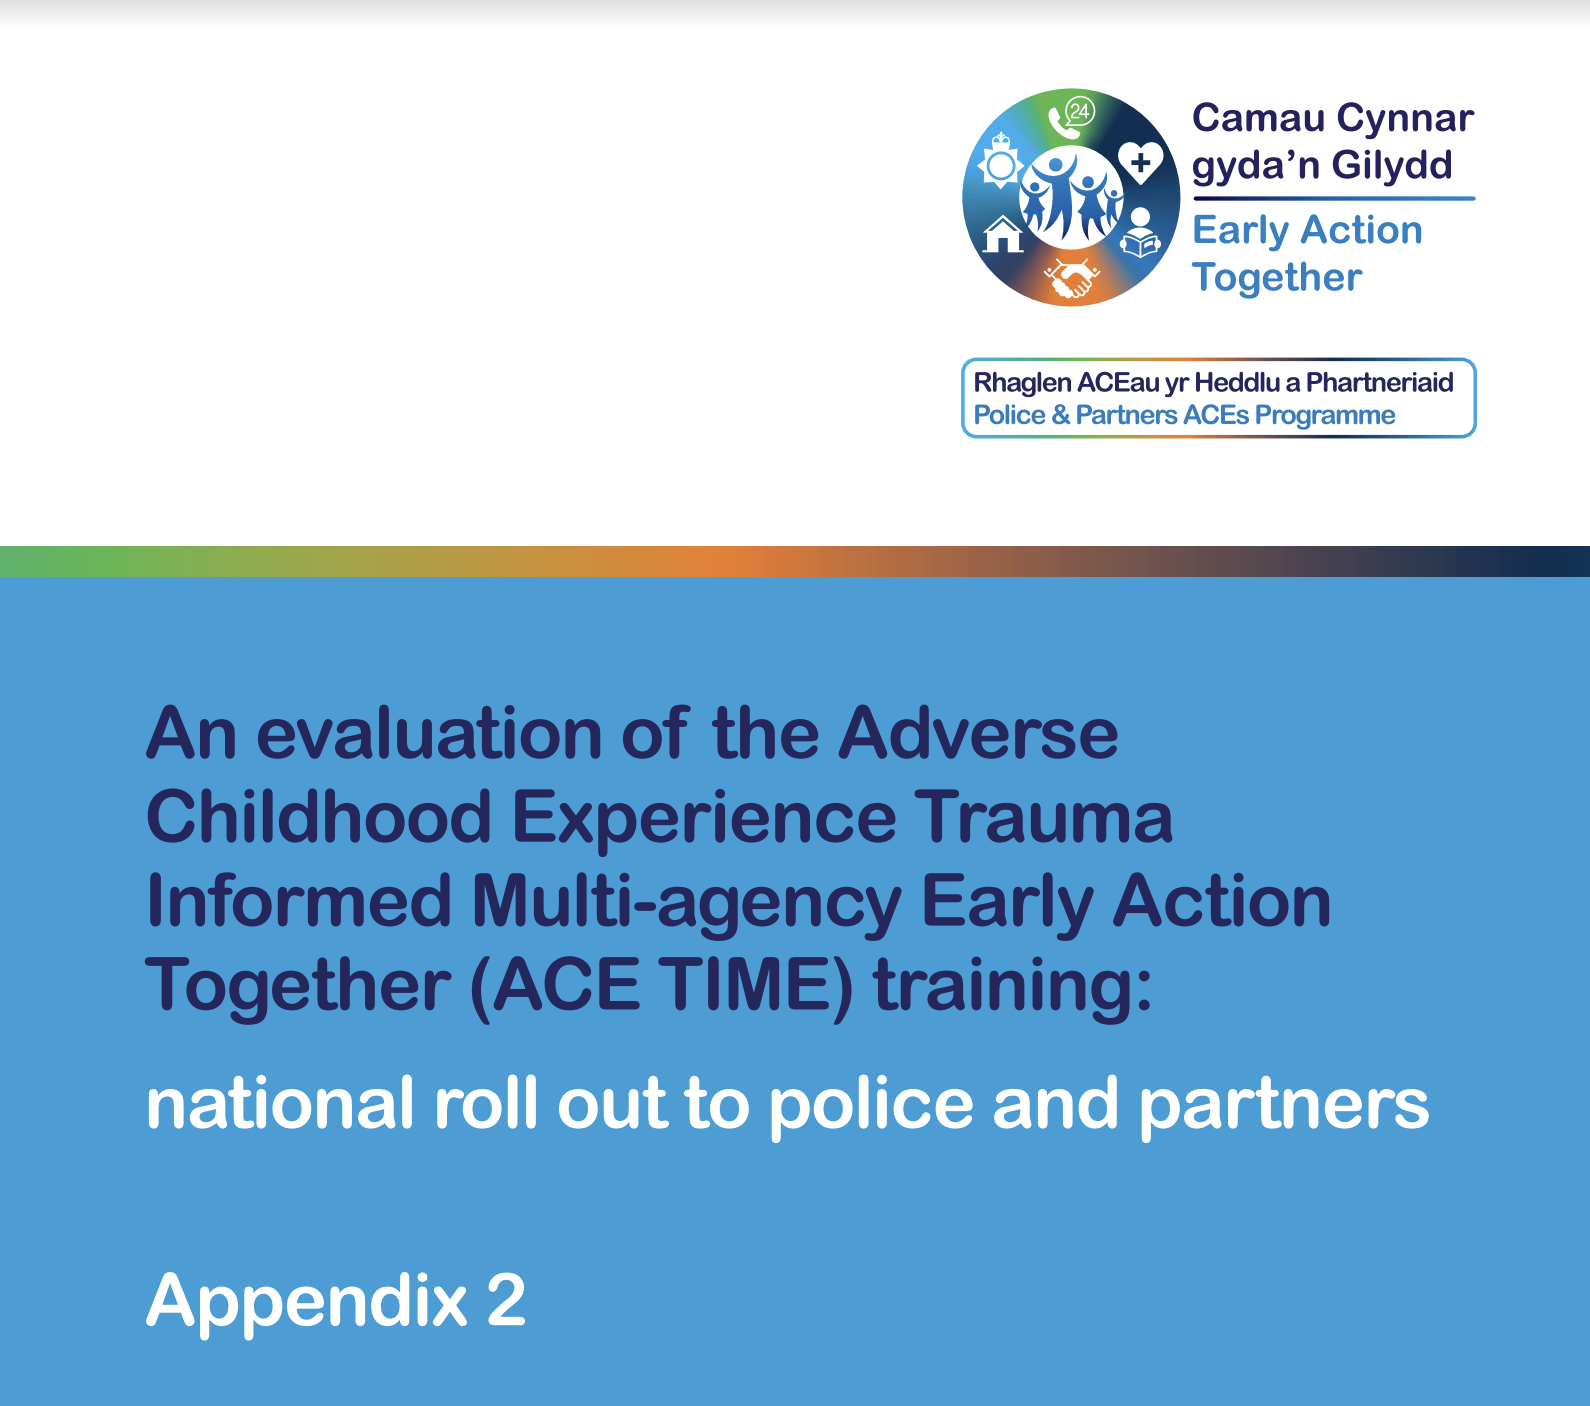 An evaluation of the adverse childhood experience traula informed multi-agency early action together (ACE TIME) training: national roll out to police and partners